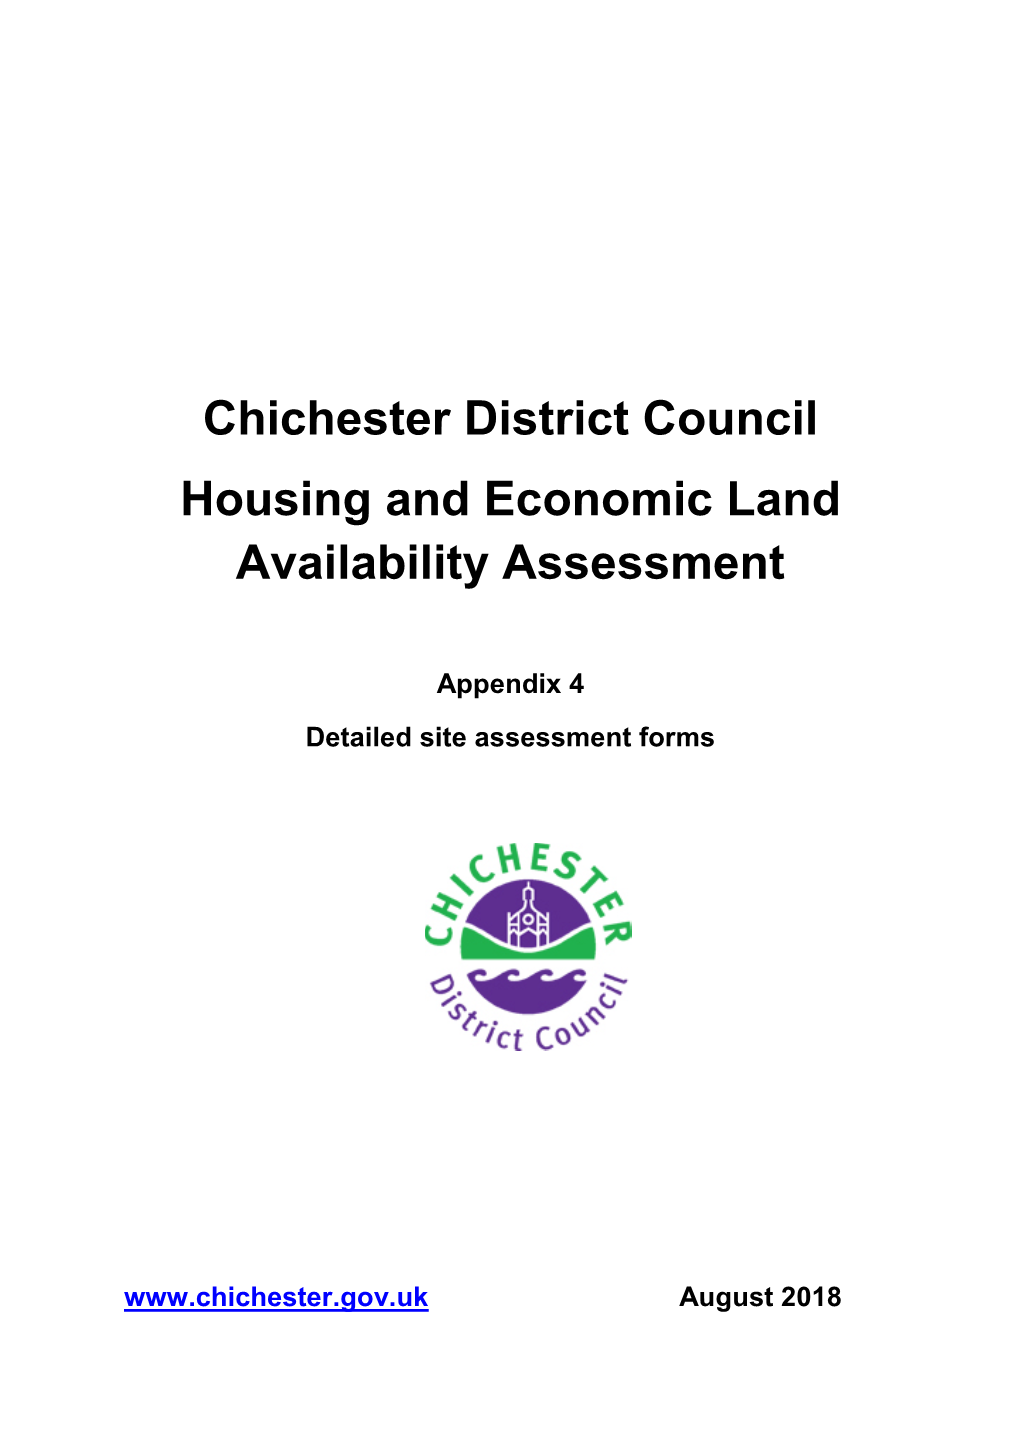 Chichester District Council Housing and Economic Land Availability Assessment